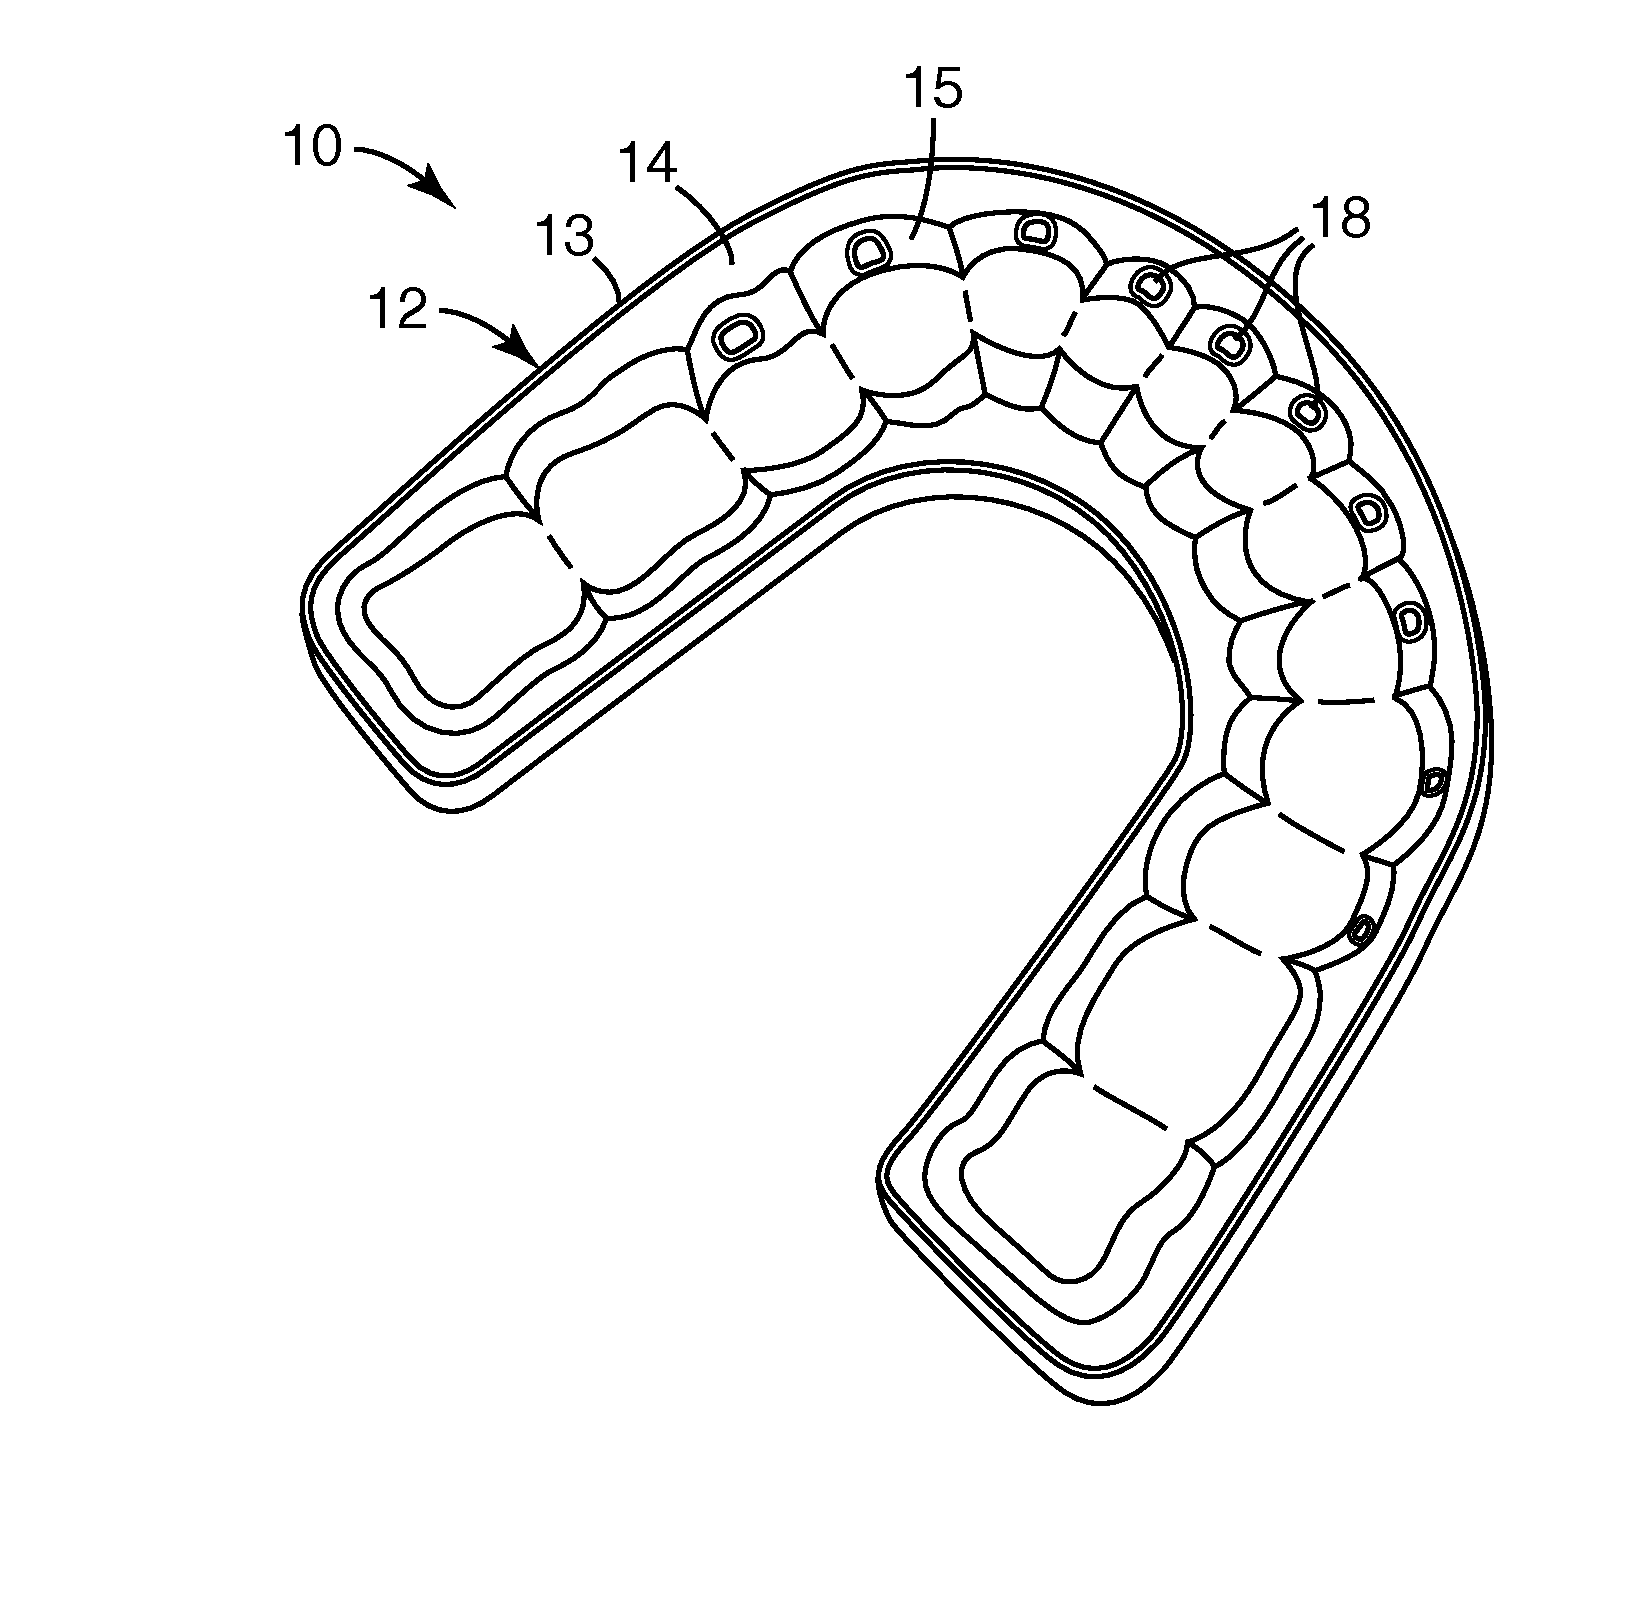 Methods and apparatus for bonding orthodontic appliances using photocurable adhesive material